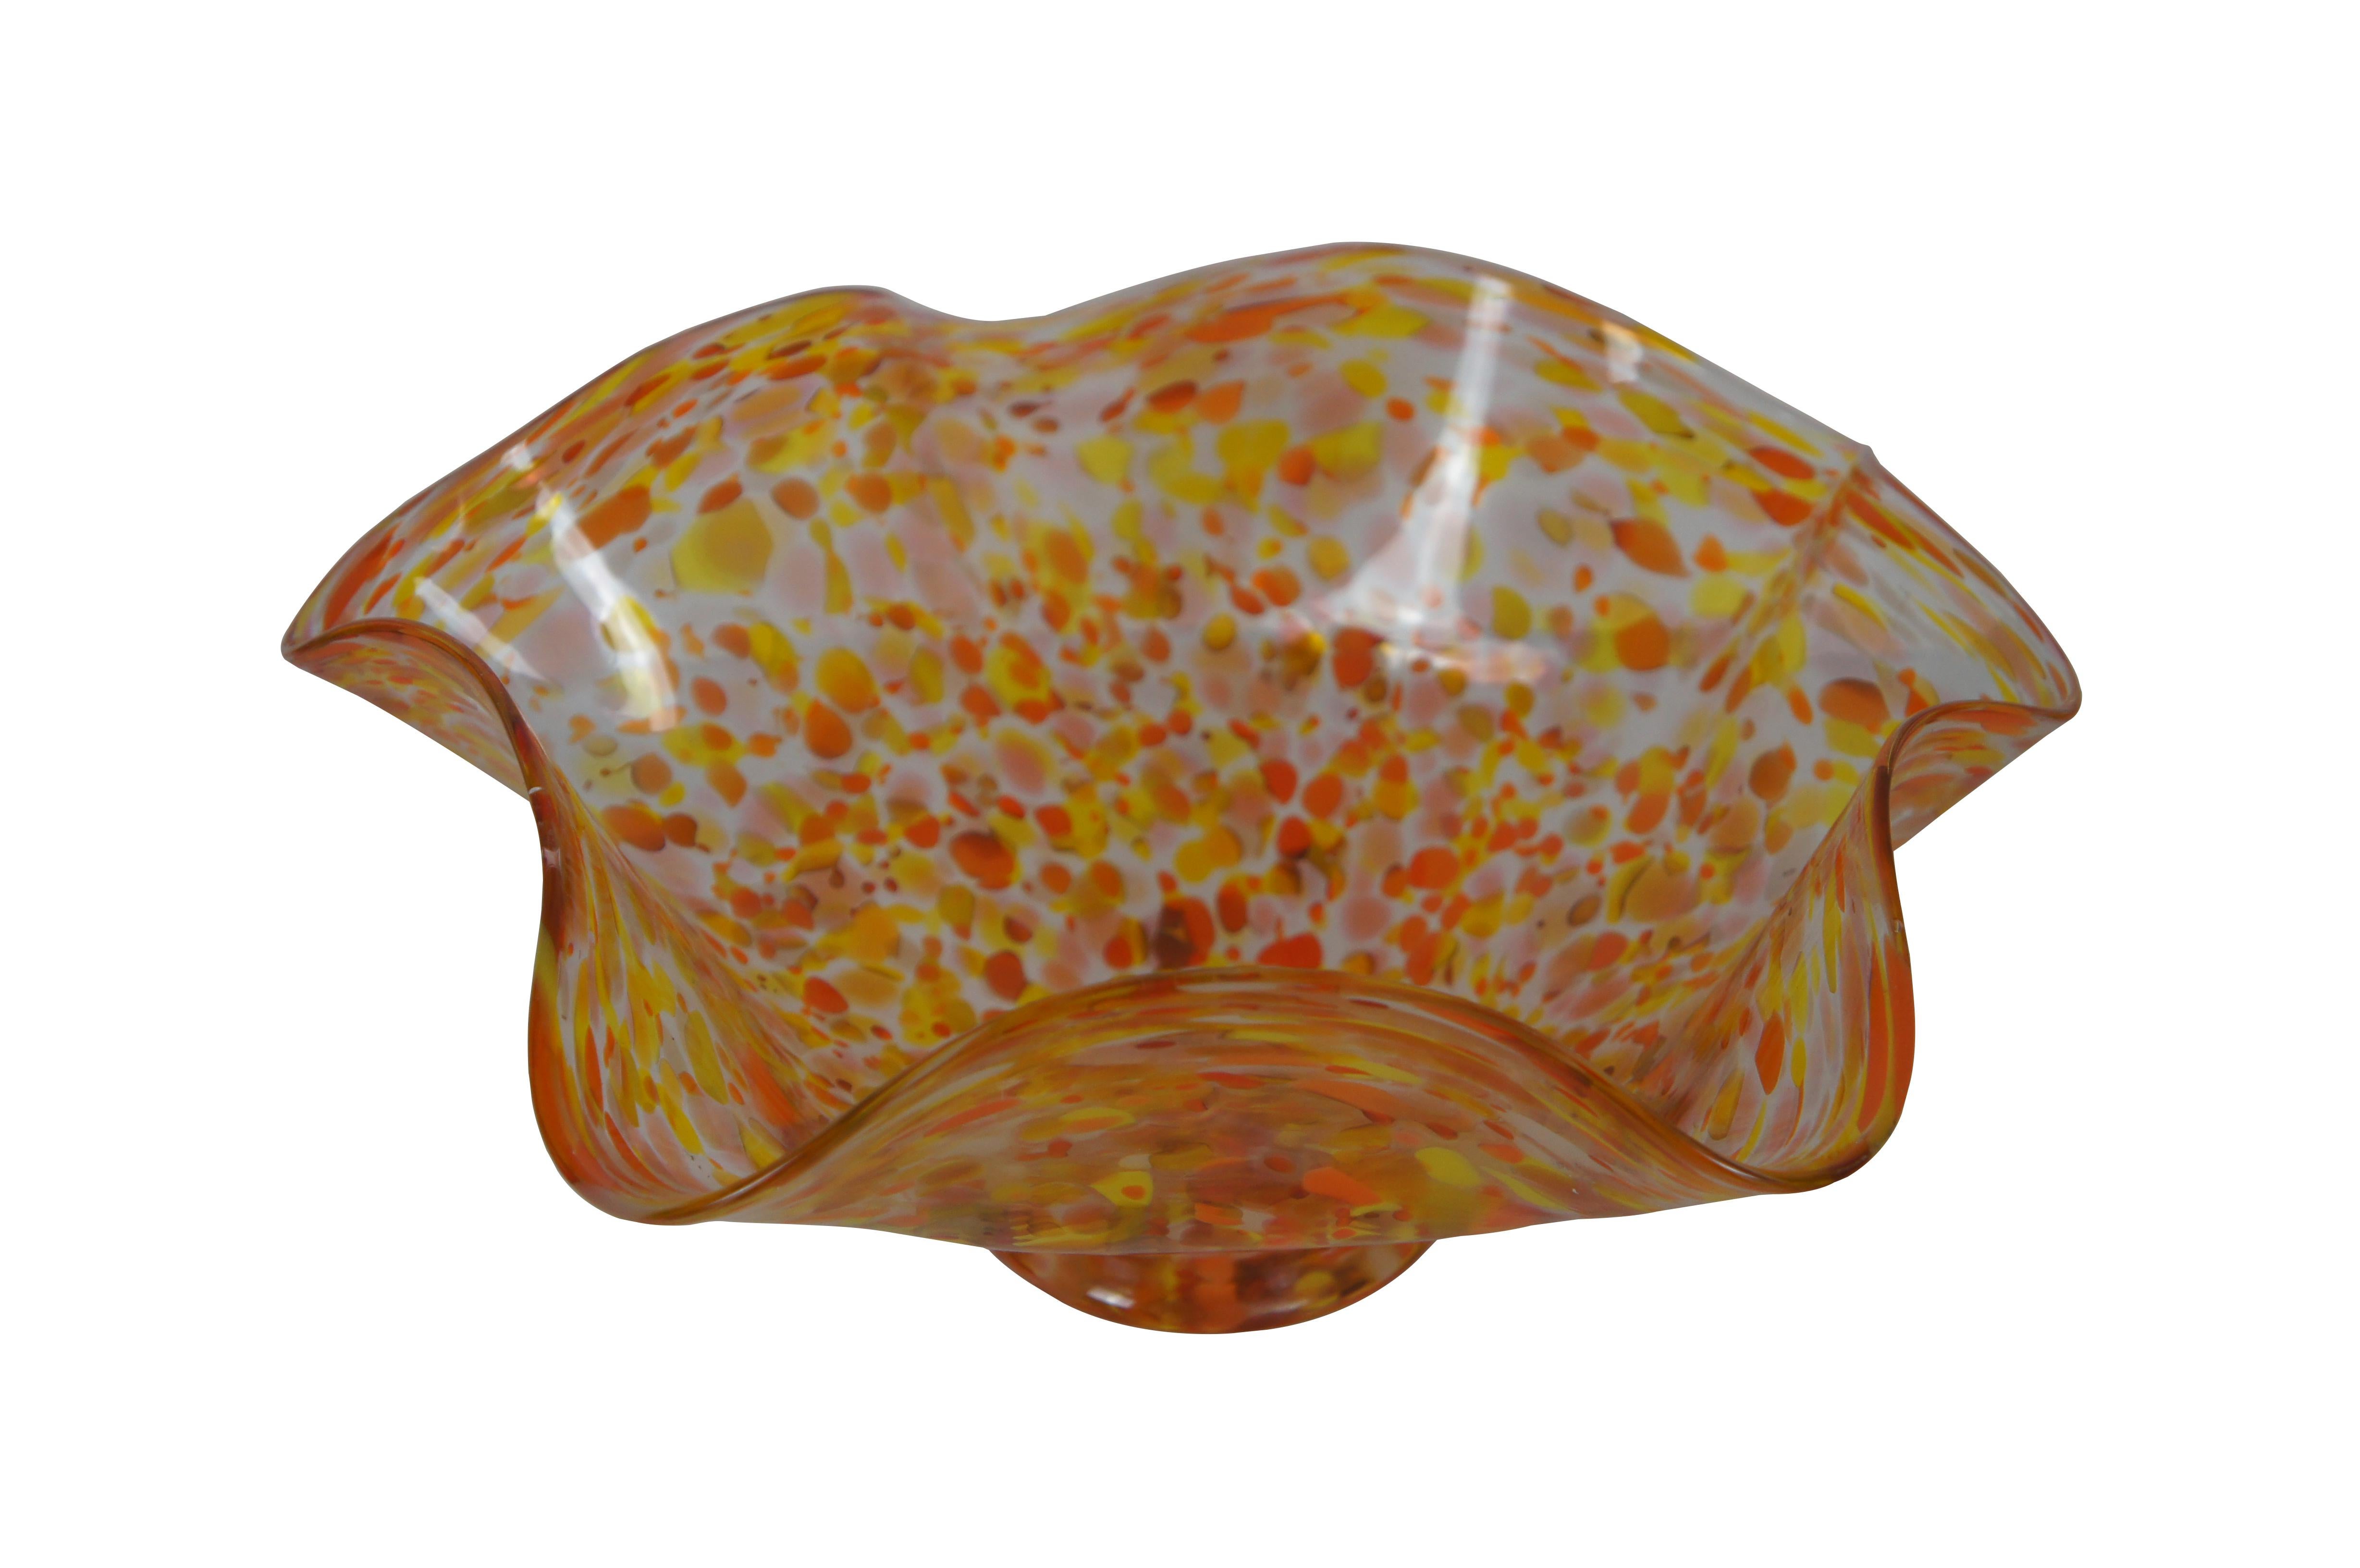 Intriguing hand blown footed free form ruffled centerpiece bowl.  Features a swirl of yellows and oranges.

Dimensions:
13.25